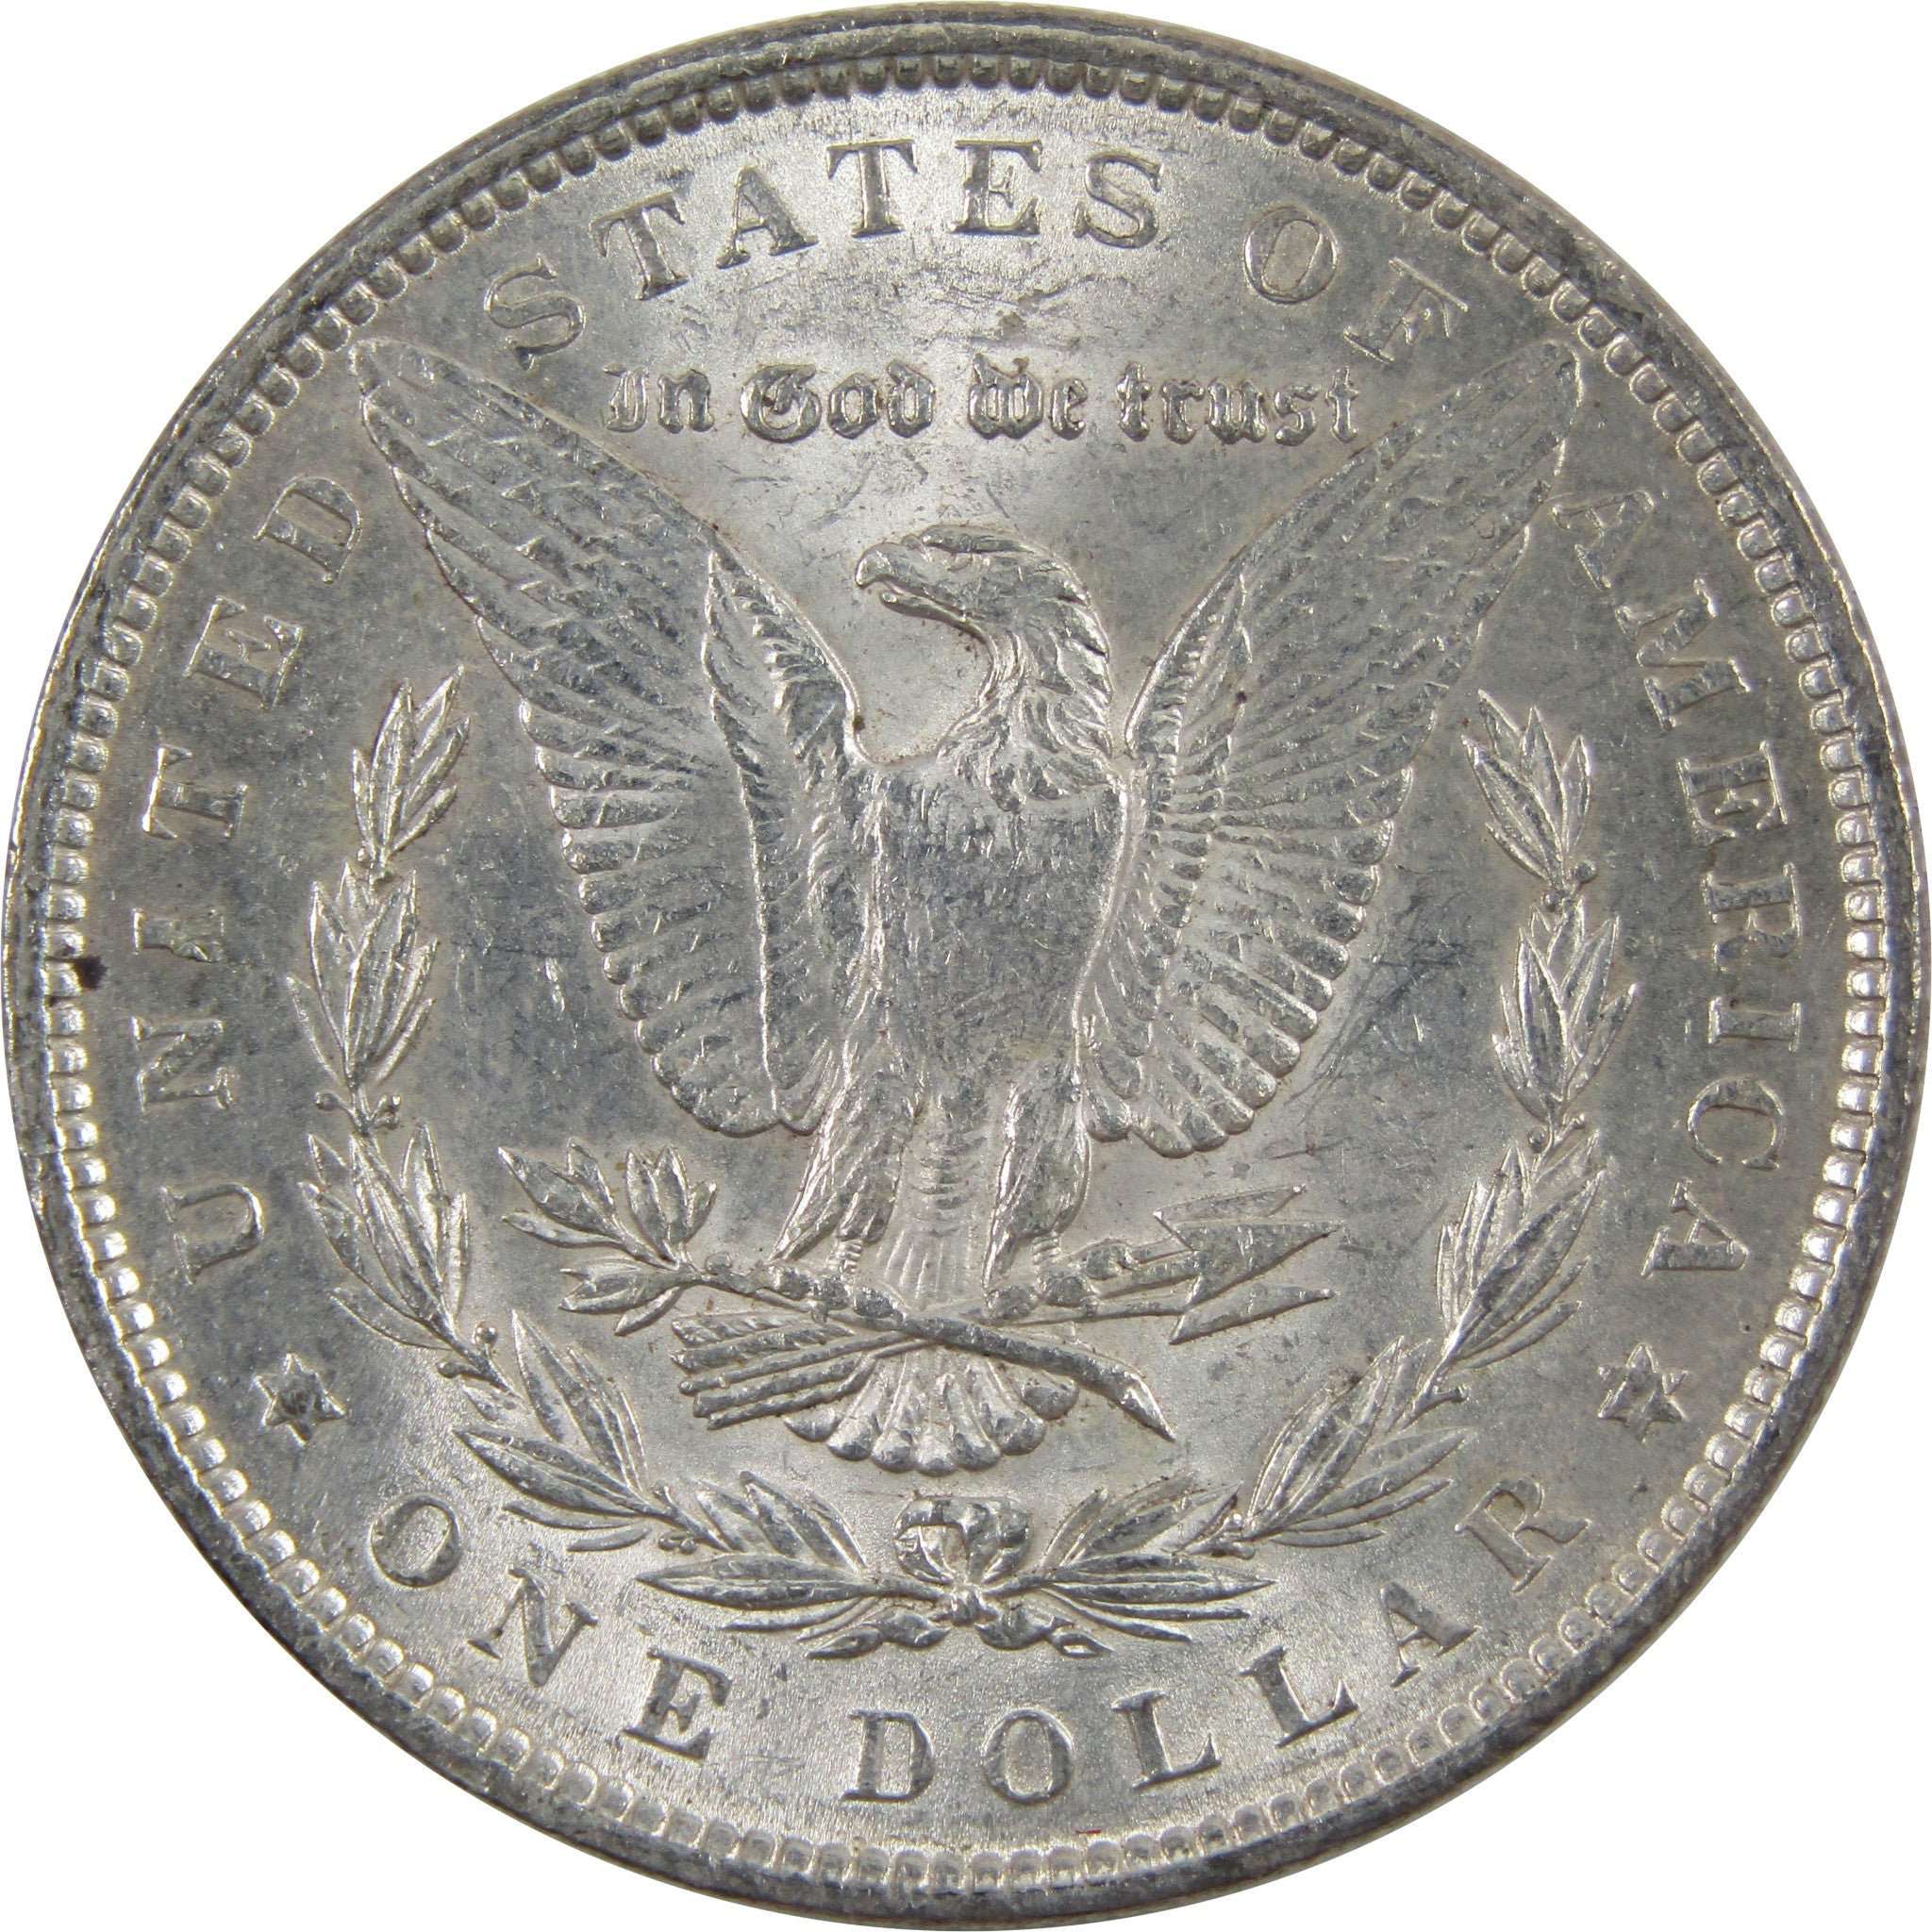 1888 Morgan Dollar AU About Uncirculated 90% Silver $1 Coin SKU:I5514 - Morgan coin - Morgan silver dollar - Morgan silver dollar for sale - Profile Coins &amp; Collectibles